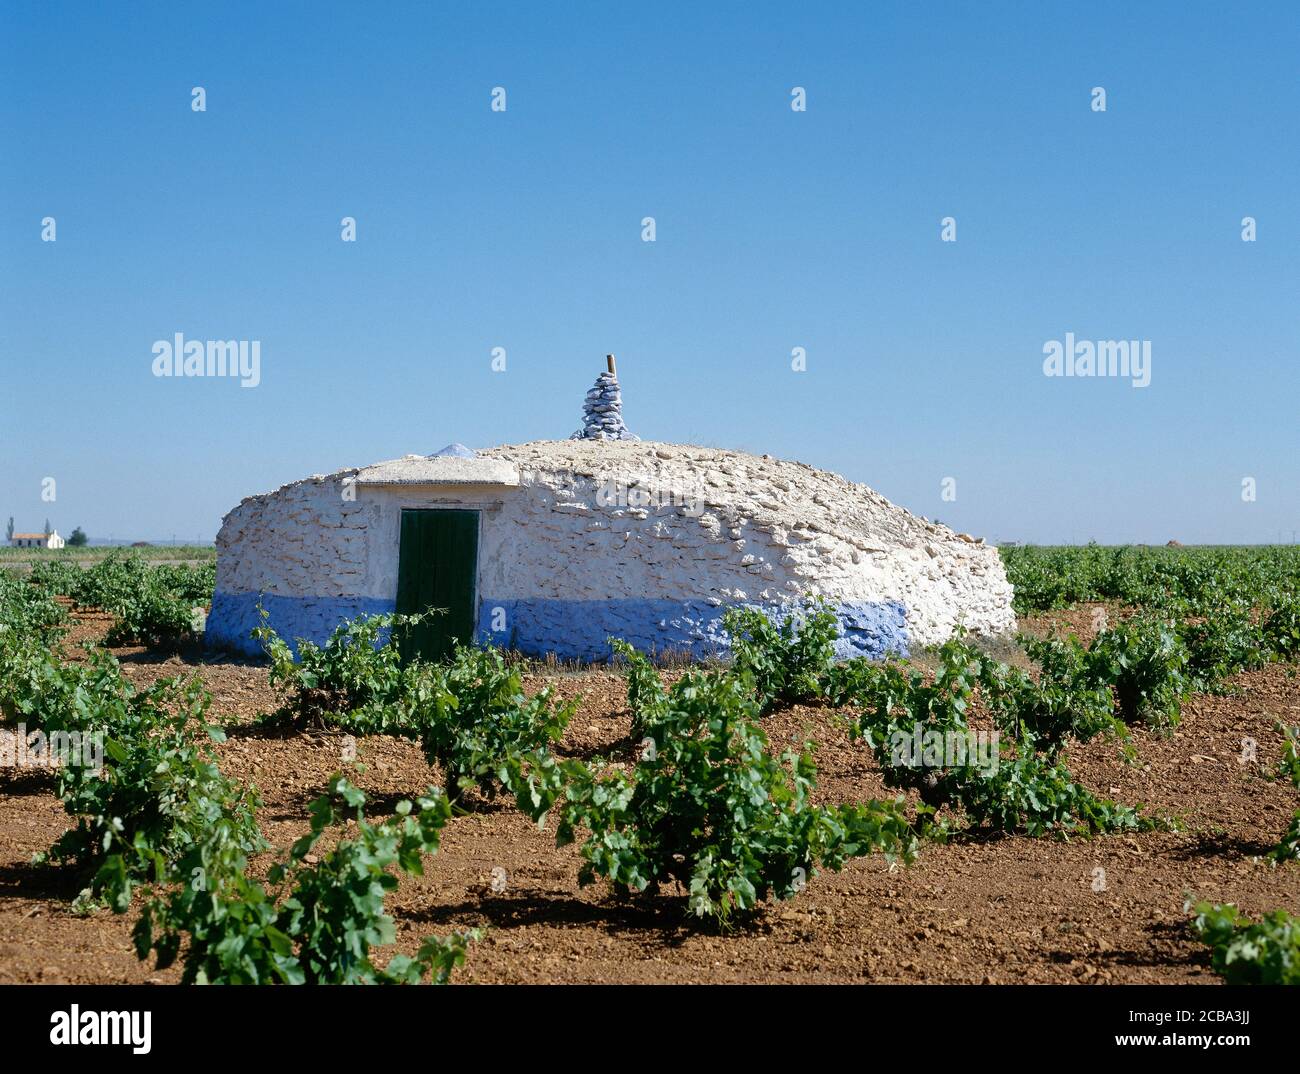 Spain, Castile-La Mancha, Ciudad Real province. Surroundings of Tomelloso. Bombo manchego. A kind of vaulted hut made with stone labs without mortar, coming from the plowing of the vinyeards. Inside there are stone beds, fireplaces, etc. Formerly they were used as homes for shepherds and peasants, although today they only serve as storage. Stock Photo